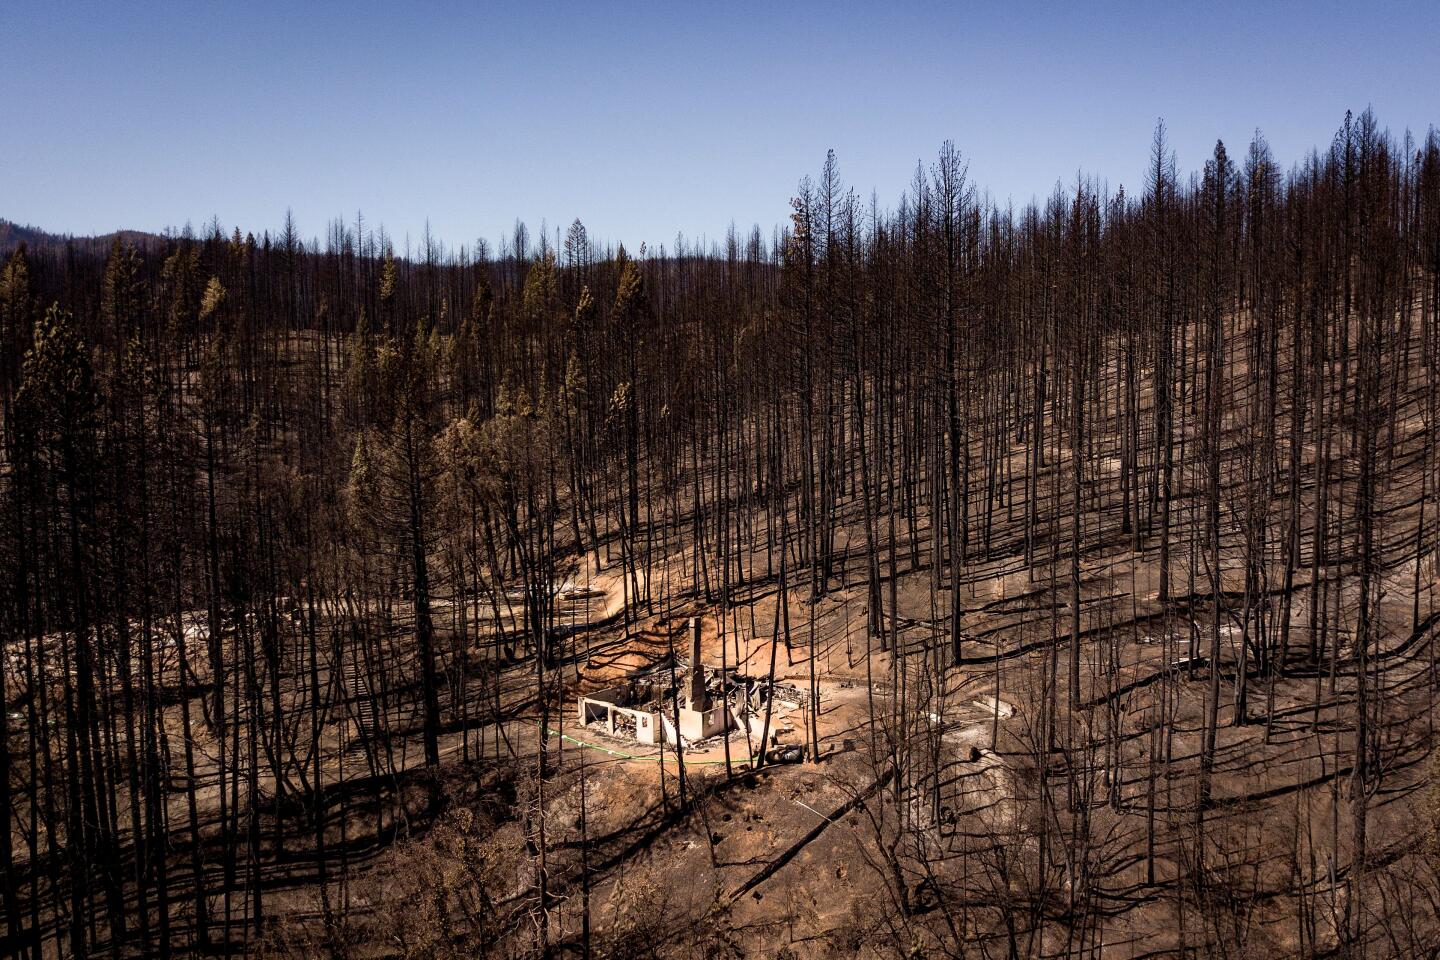 An aerial picture taken on Sept. 24, 2021 shows a burned home among burnt trees in Greenville.